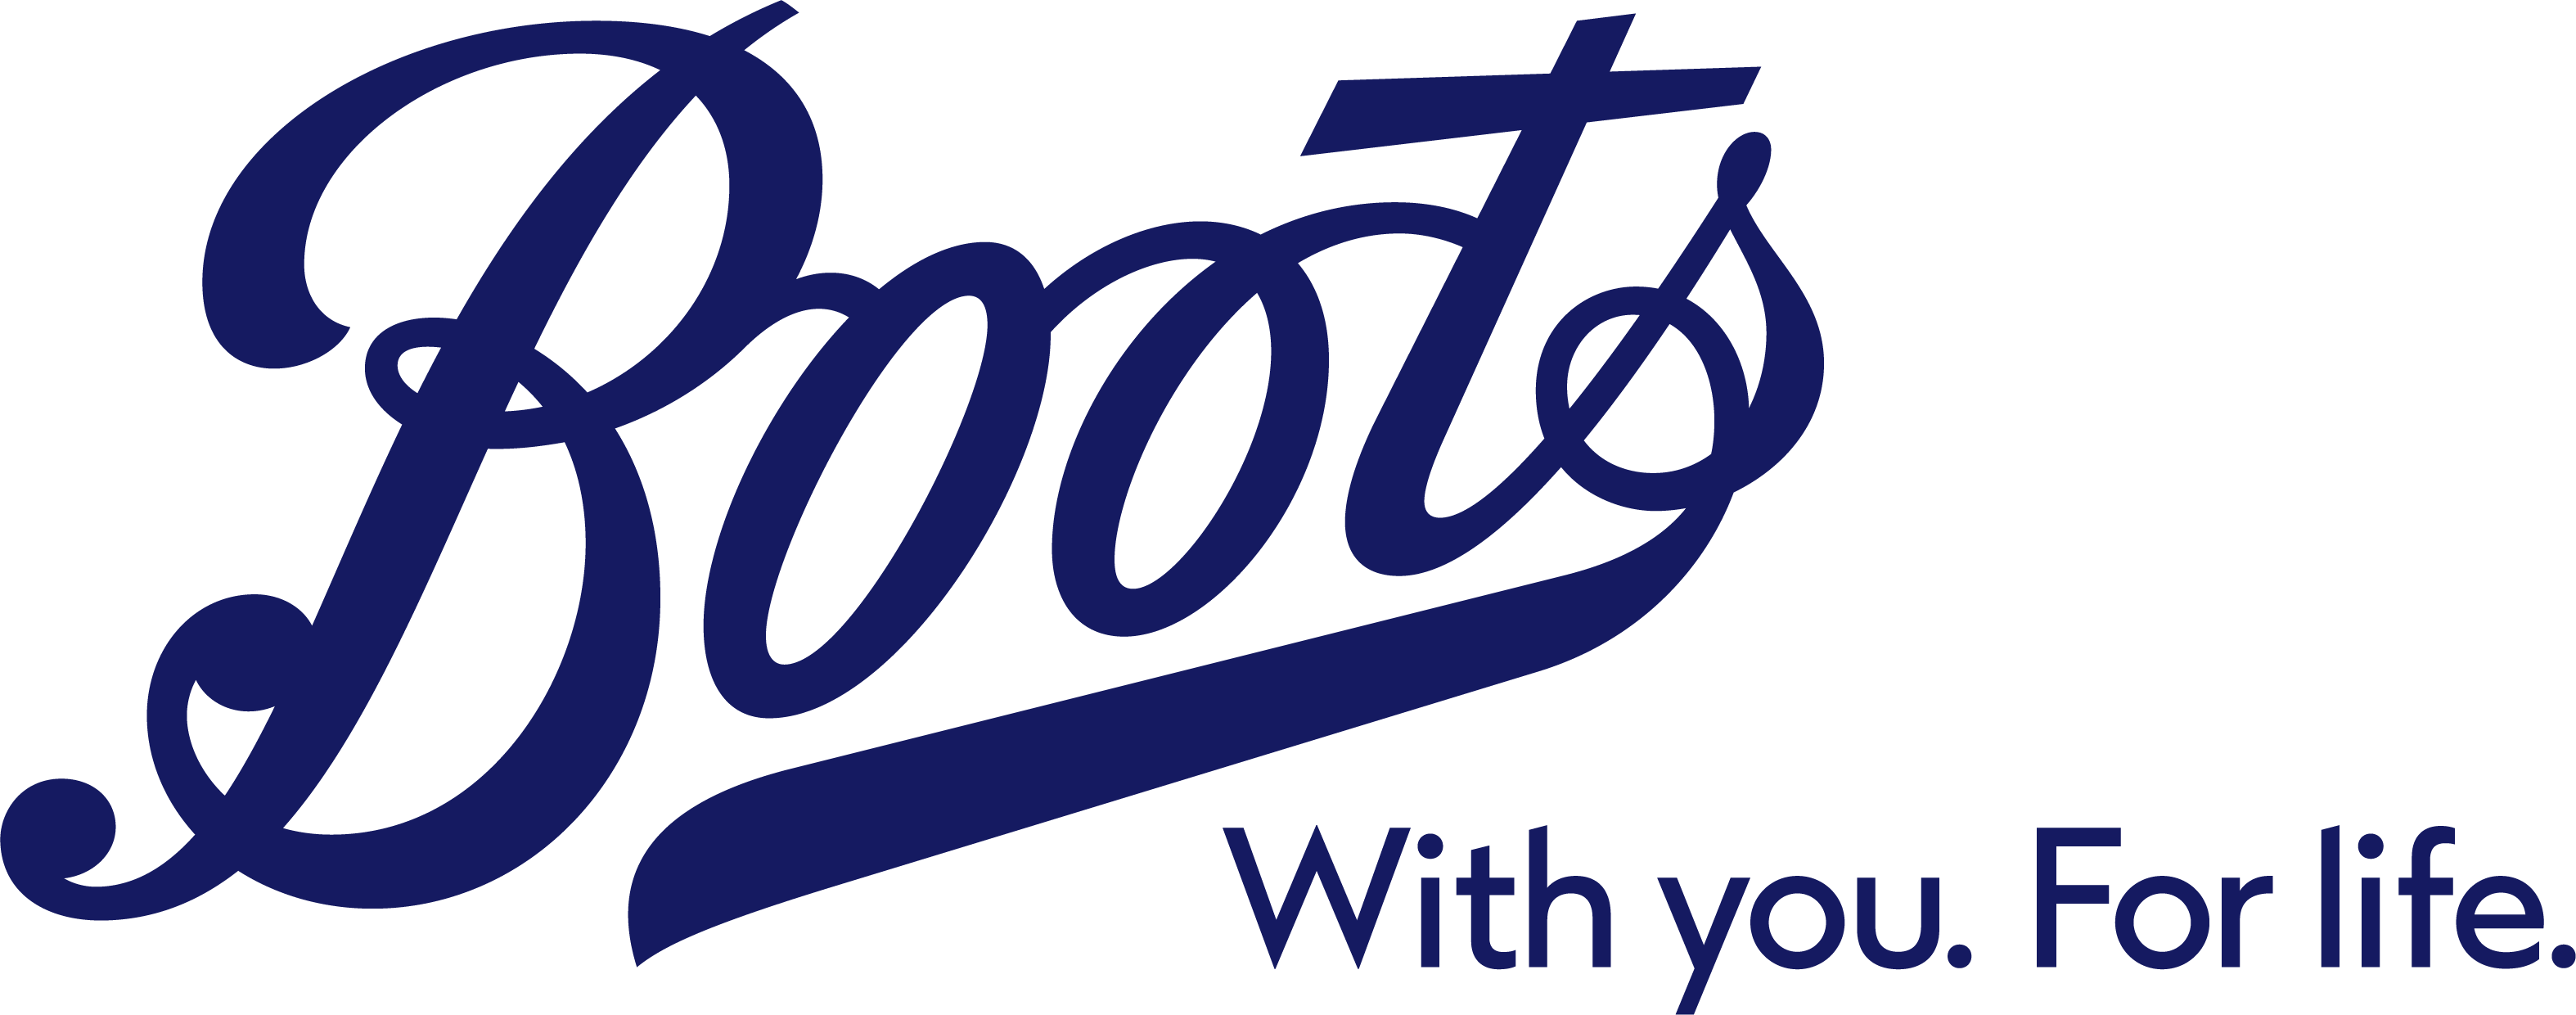 Boots Pharmacist Opportunities - Request a call back